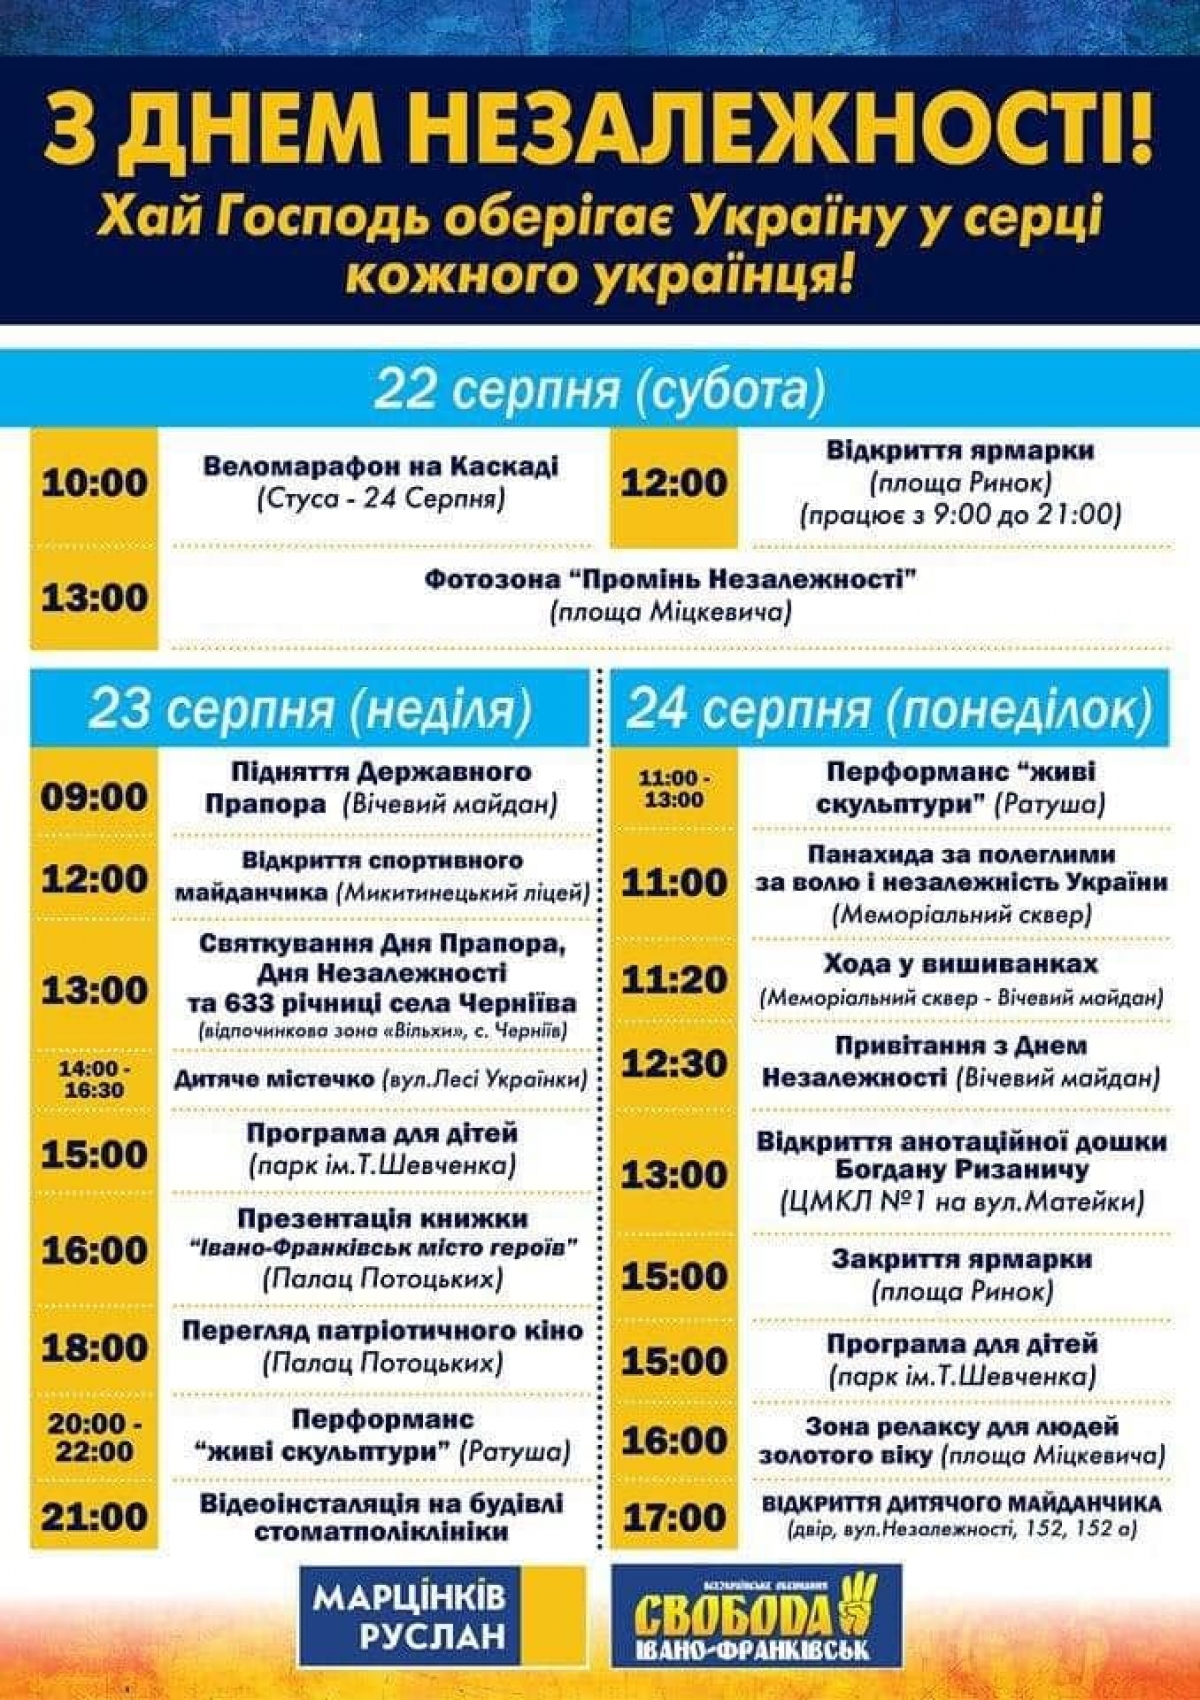 Program of events dedicated to Independence Day